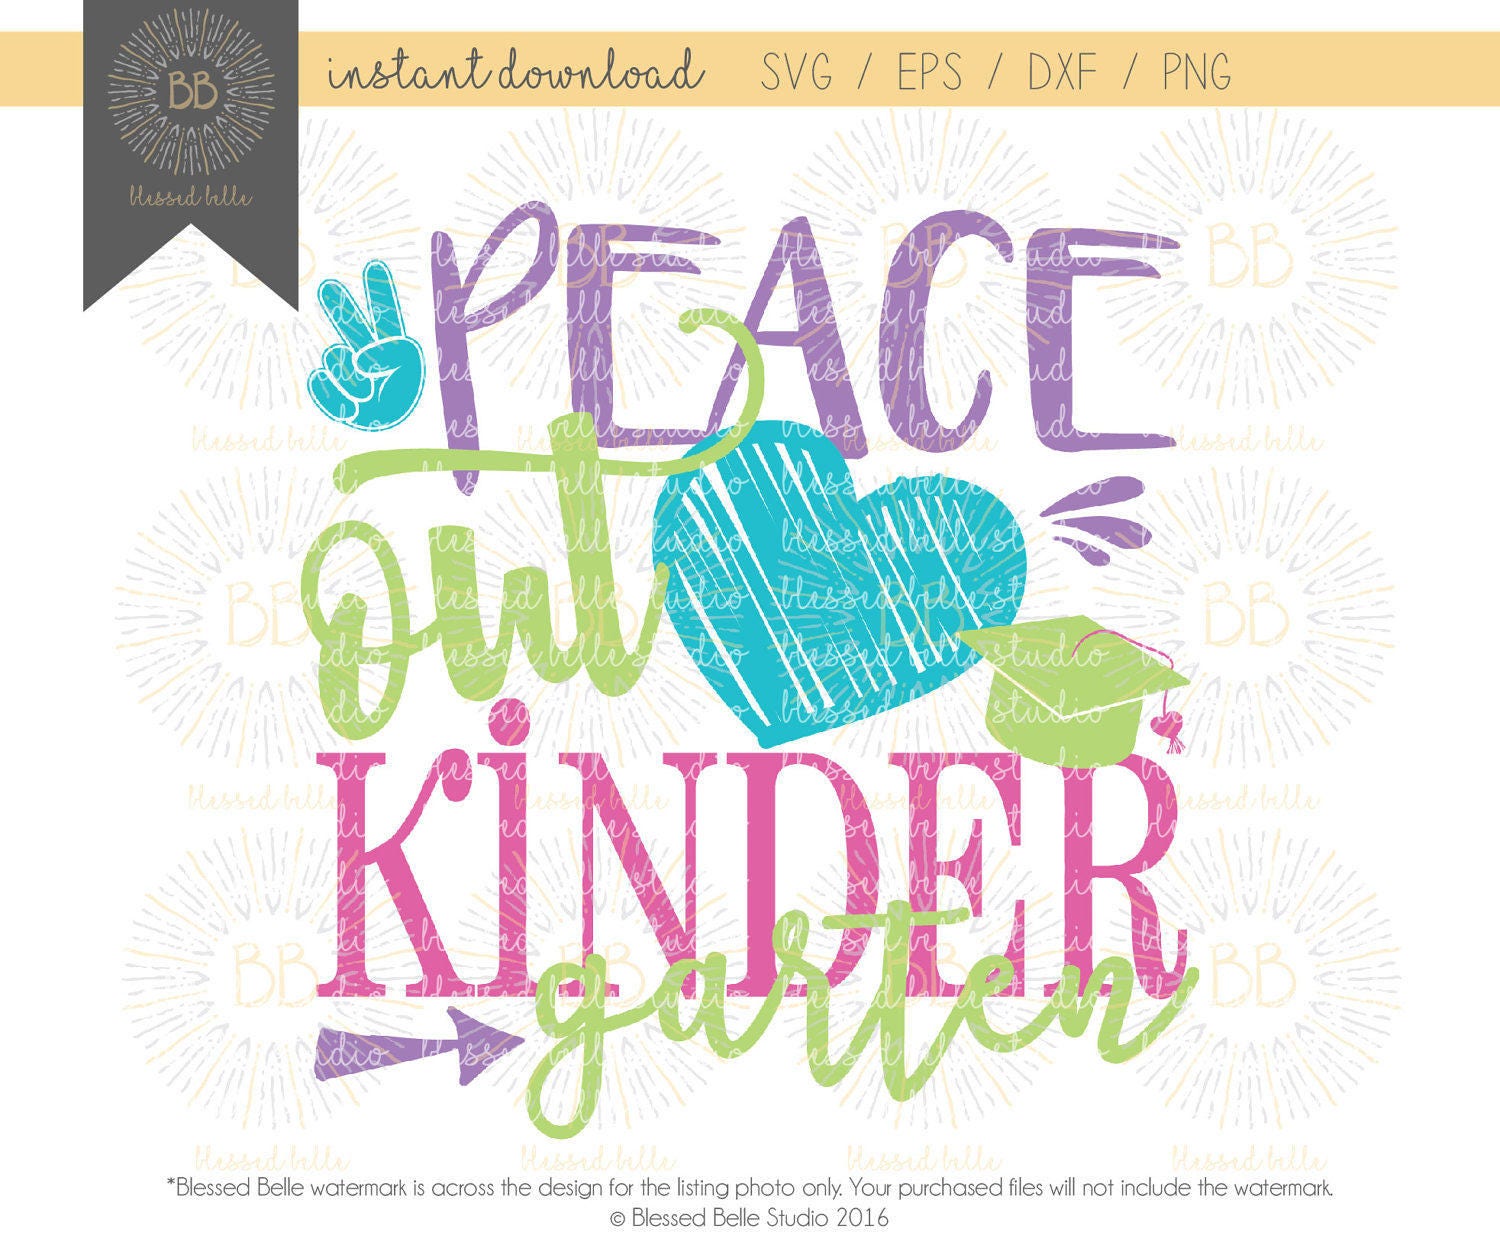 Free Free 146 Silhouette Cameo Peace Out Kindergarten Svg Free SVG PNG EPS DXF File